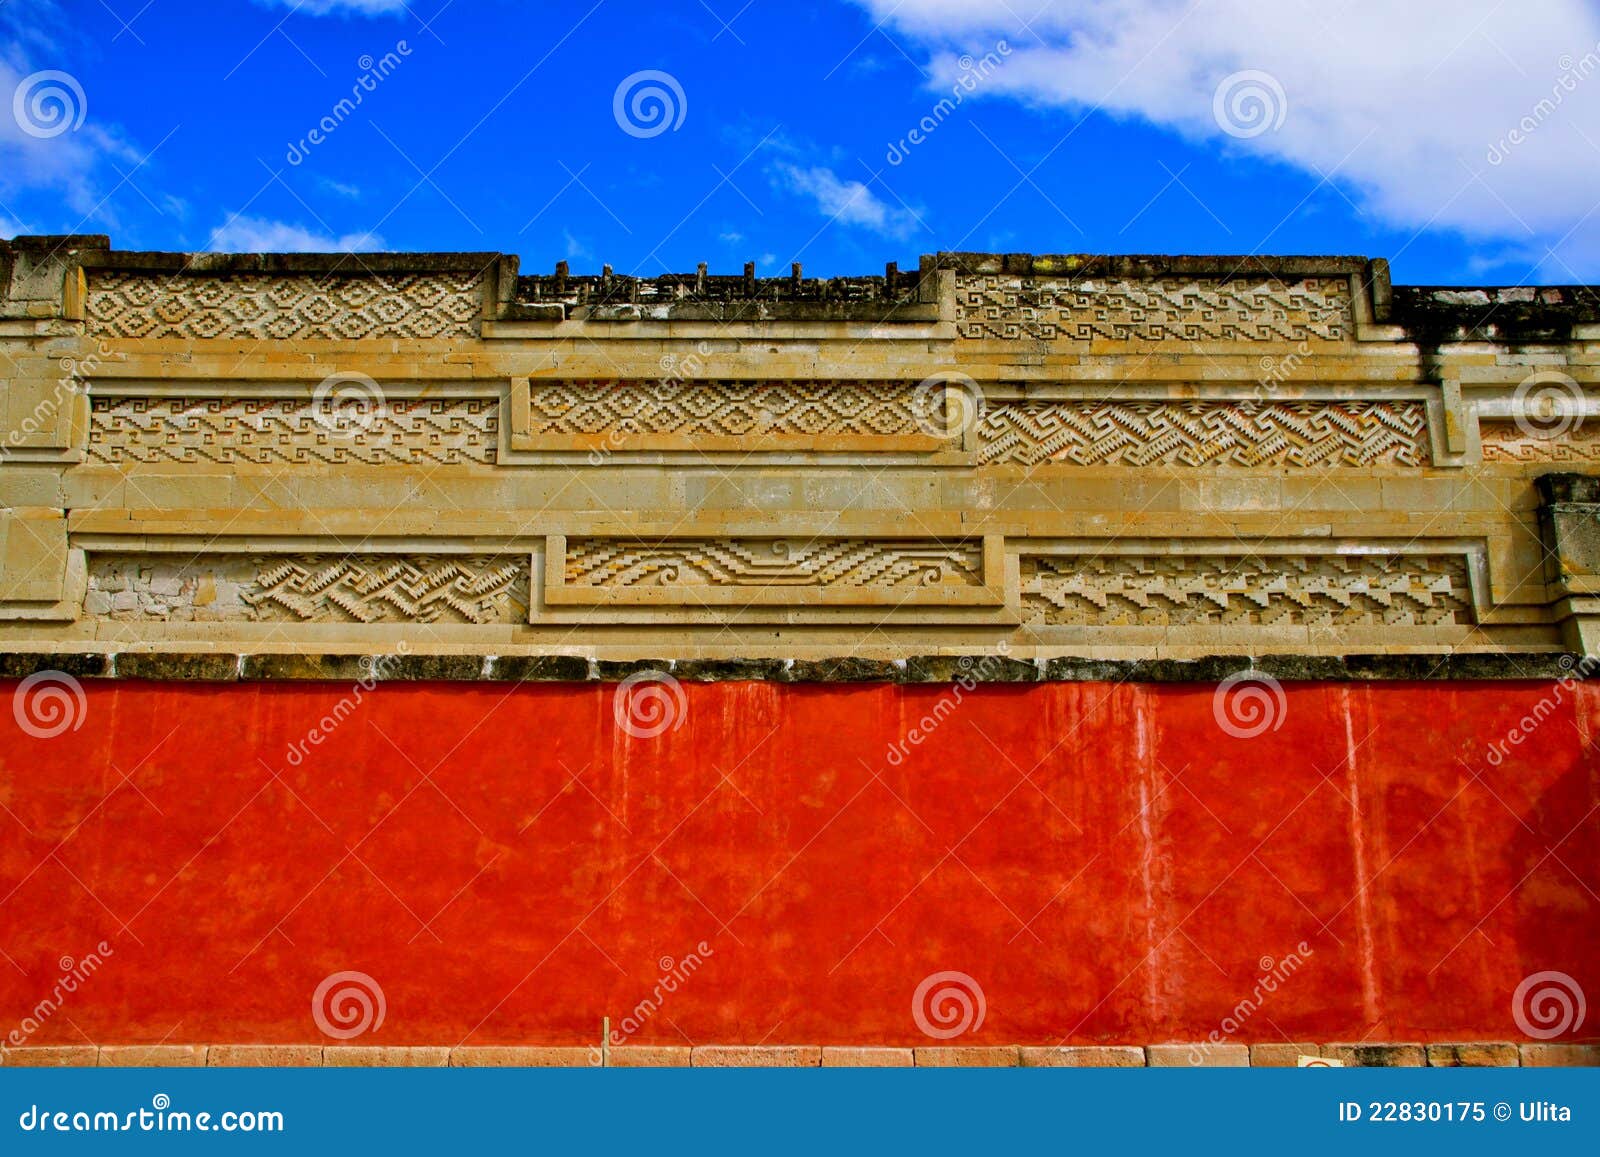 mitla, detail of the colums group (grecos)